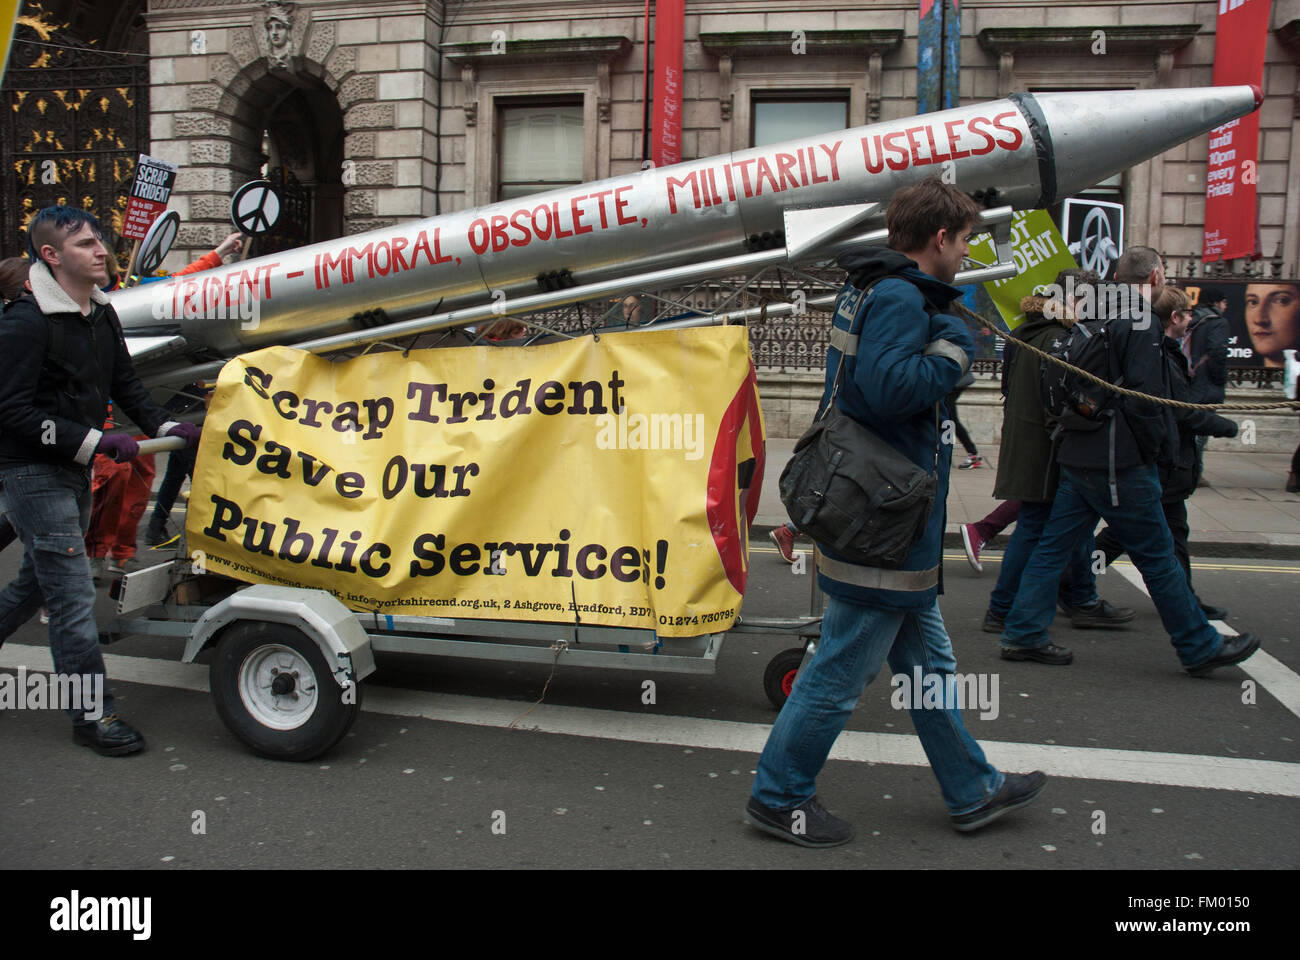 CND, anti Trident demo with model of missile with "Immoral,obsolete, useless", and "Scrap trident, Save our public services" Stock Photo